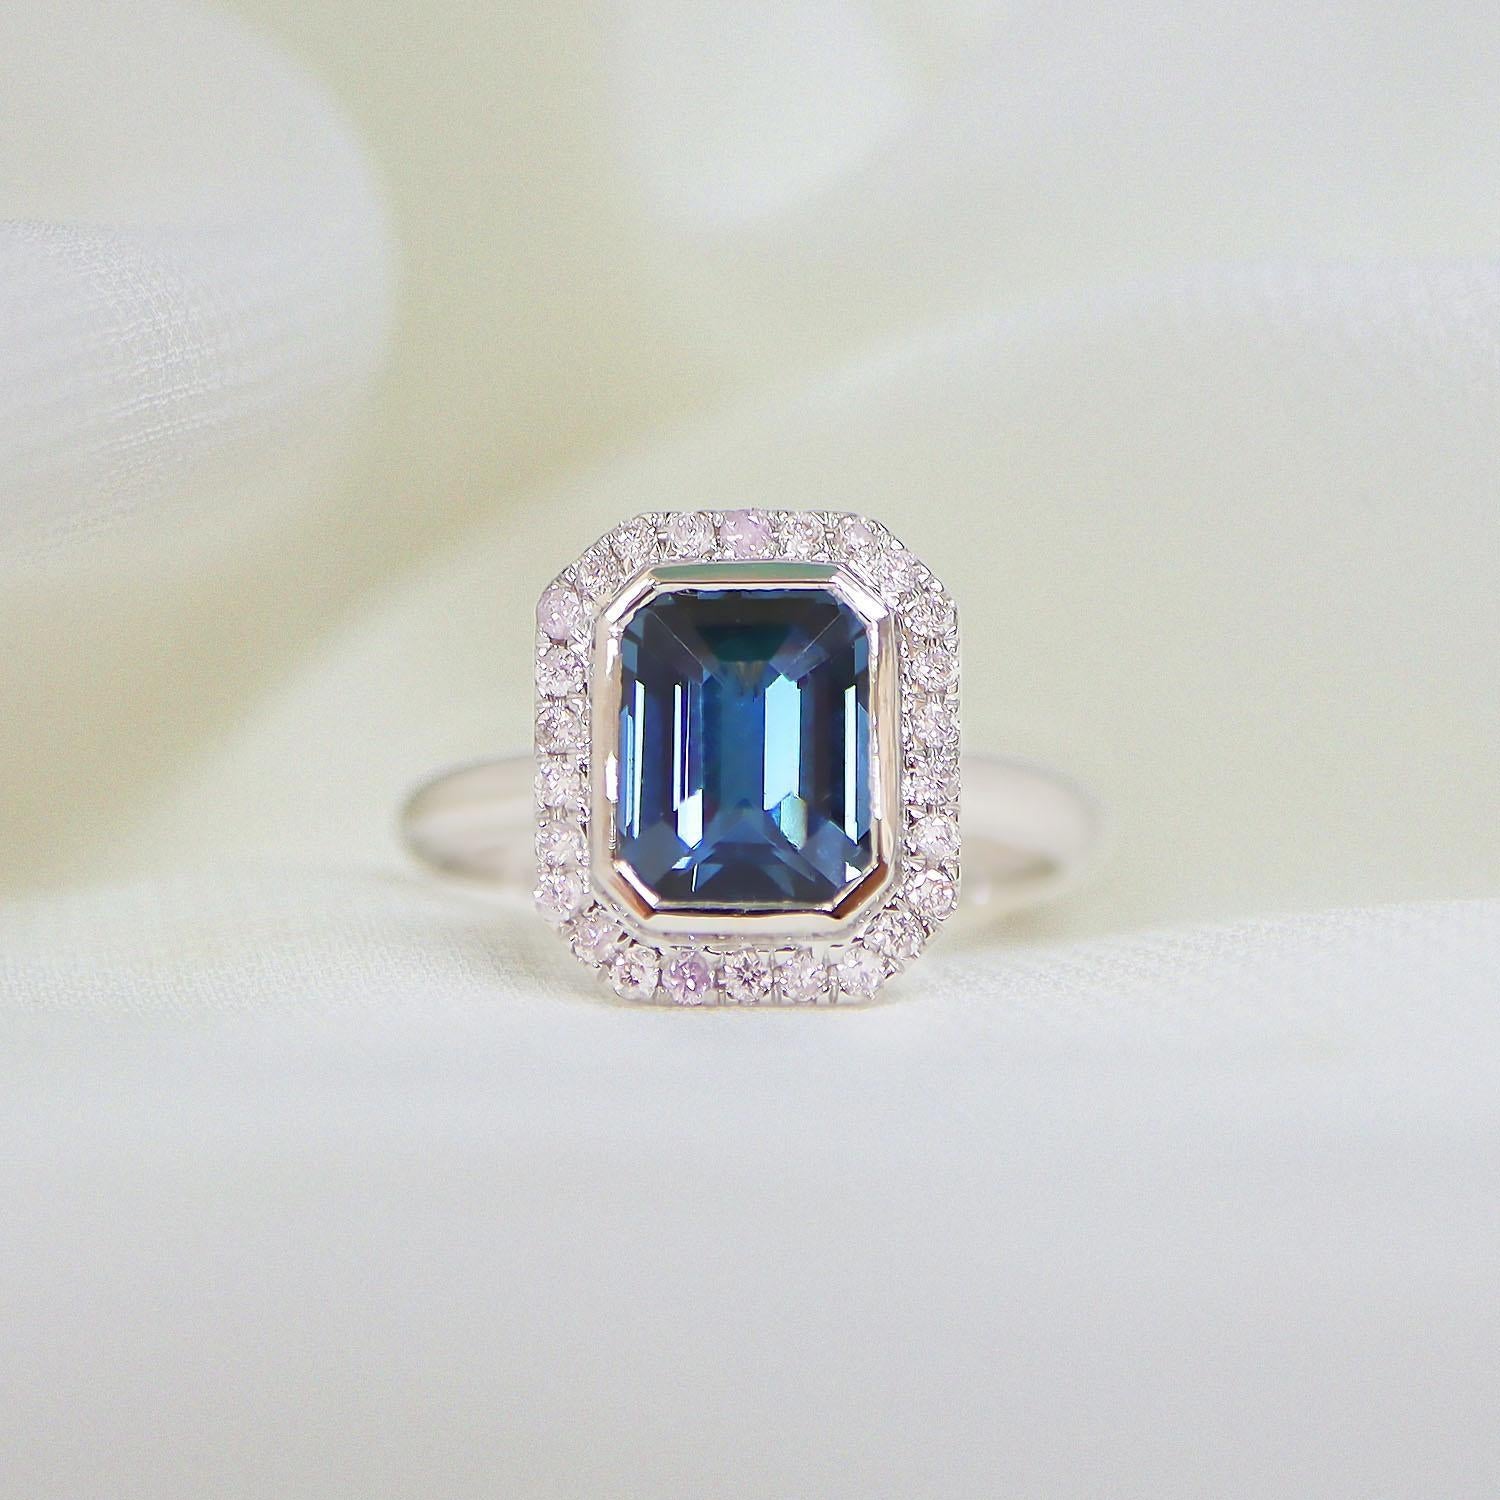 *IGI 14K 1.78 Ct Blue Spinel&Pink Diamonds Antique Engagement Ring*

IGI-certified natural untreated greyish-blue spinel weighing 1.78 ct set on 14K white gold pave' design band with natural pink diamonds weighing 0.17 ct.  

The ring combines